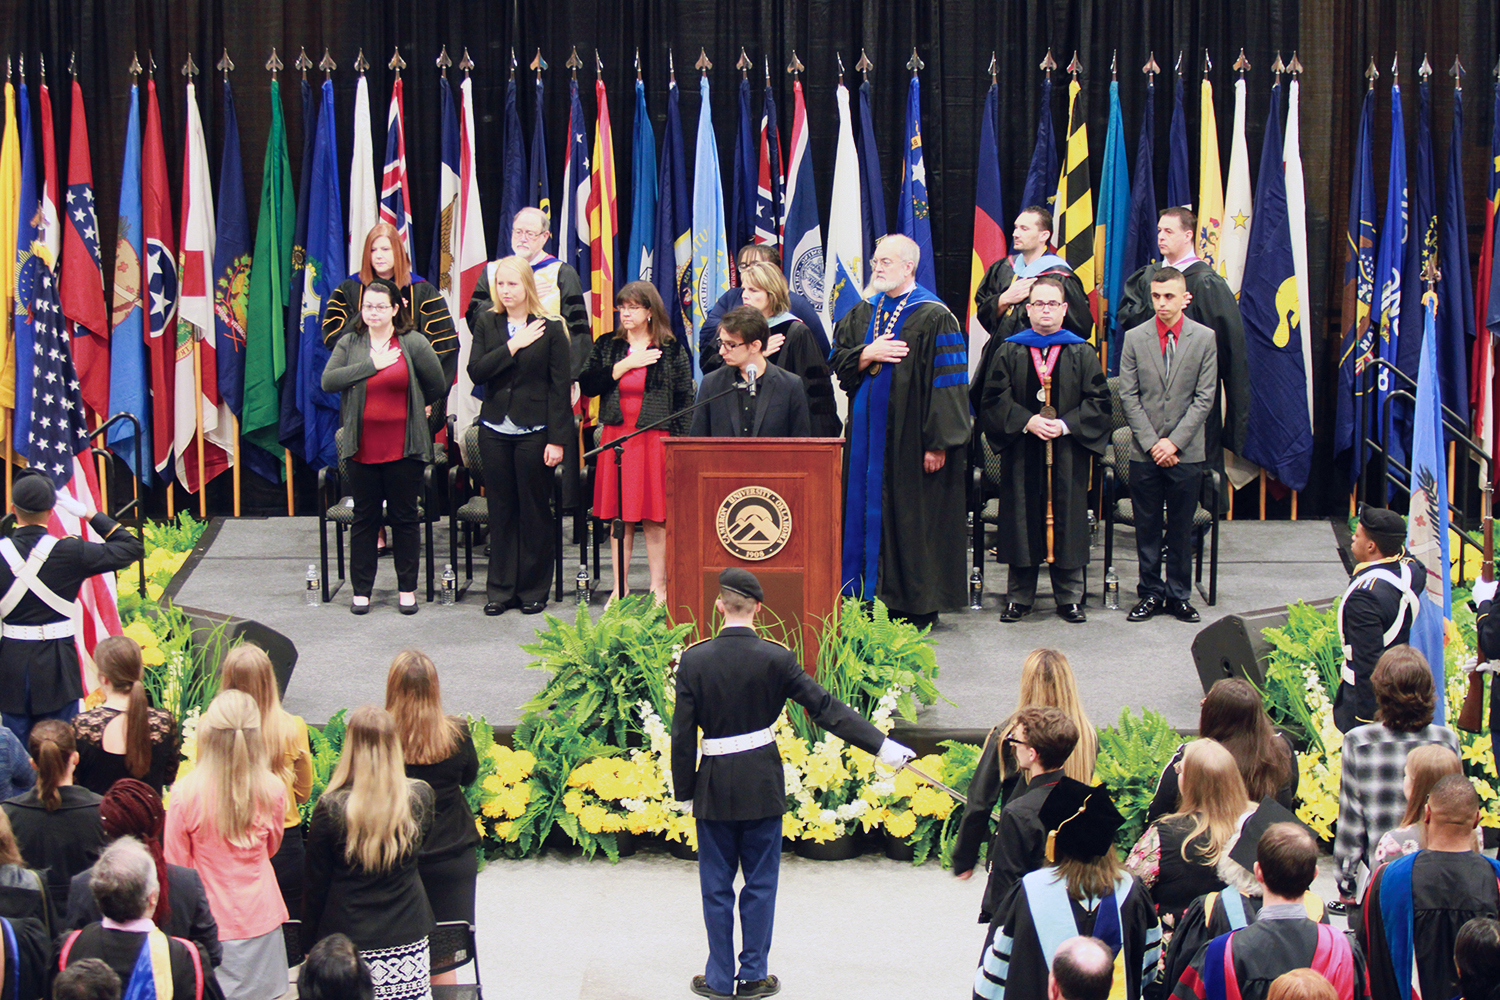 CU Holds Convocation